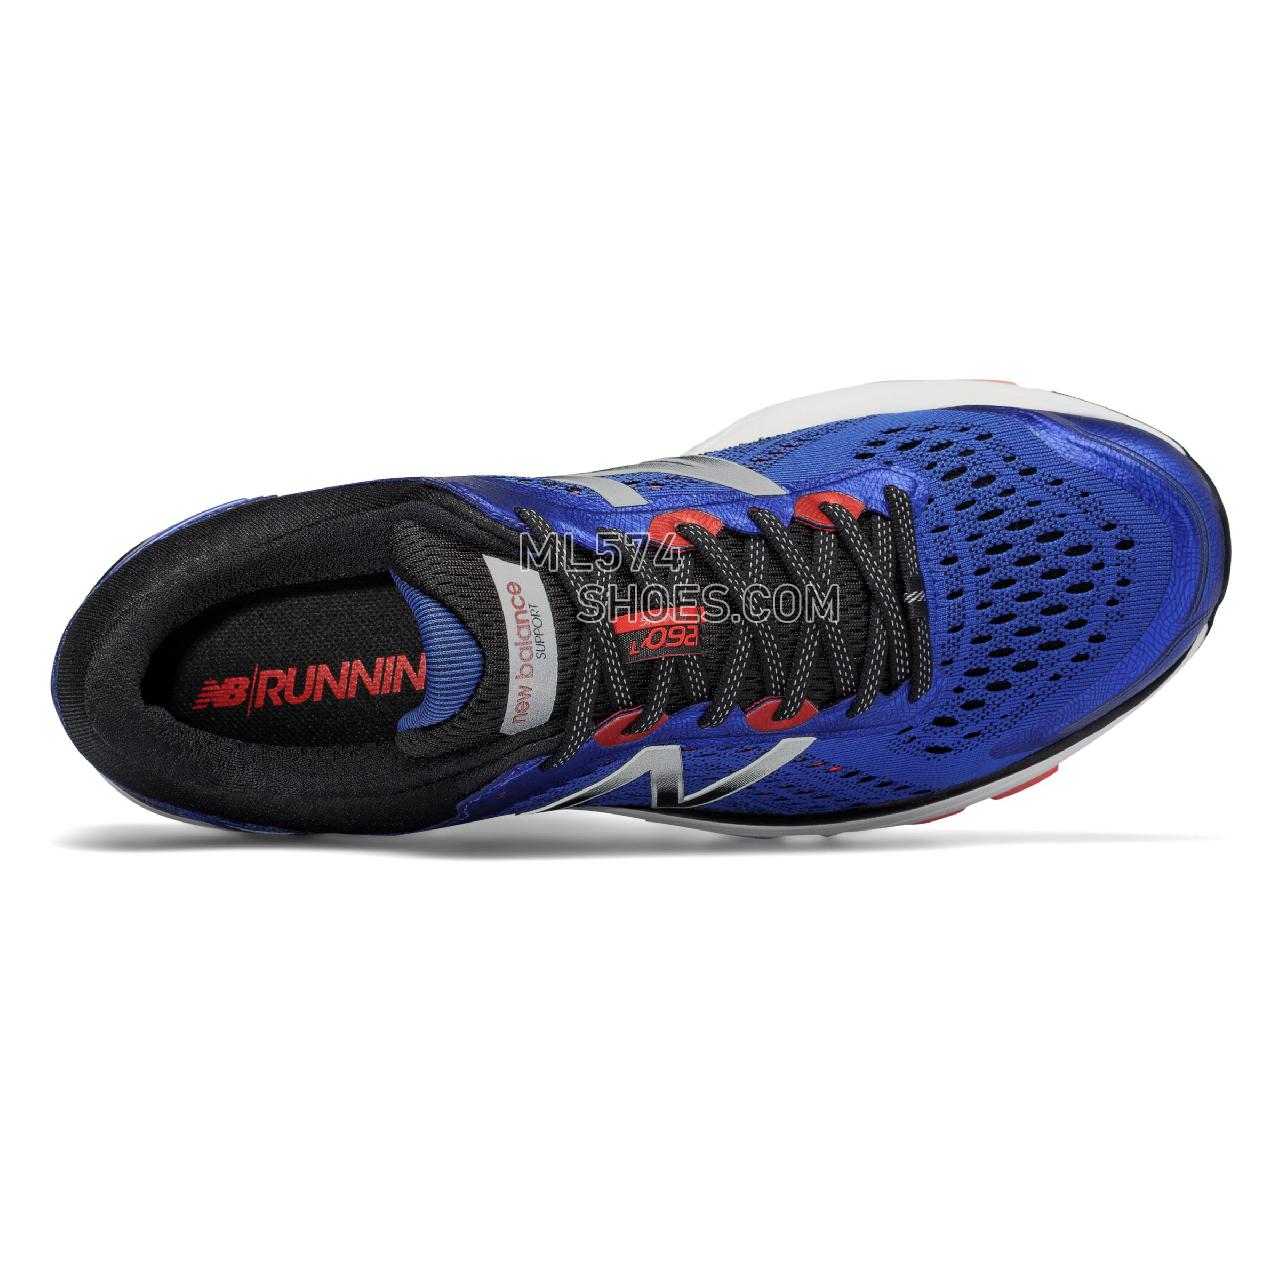 New Balance 1260v7 - Men's 1260 - Running Pacific with Black and Flame - M1260BO7